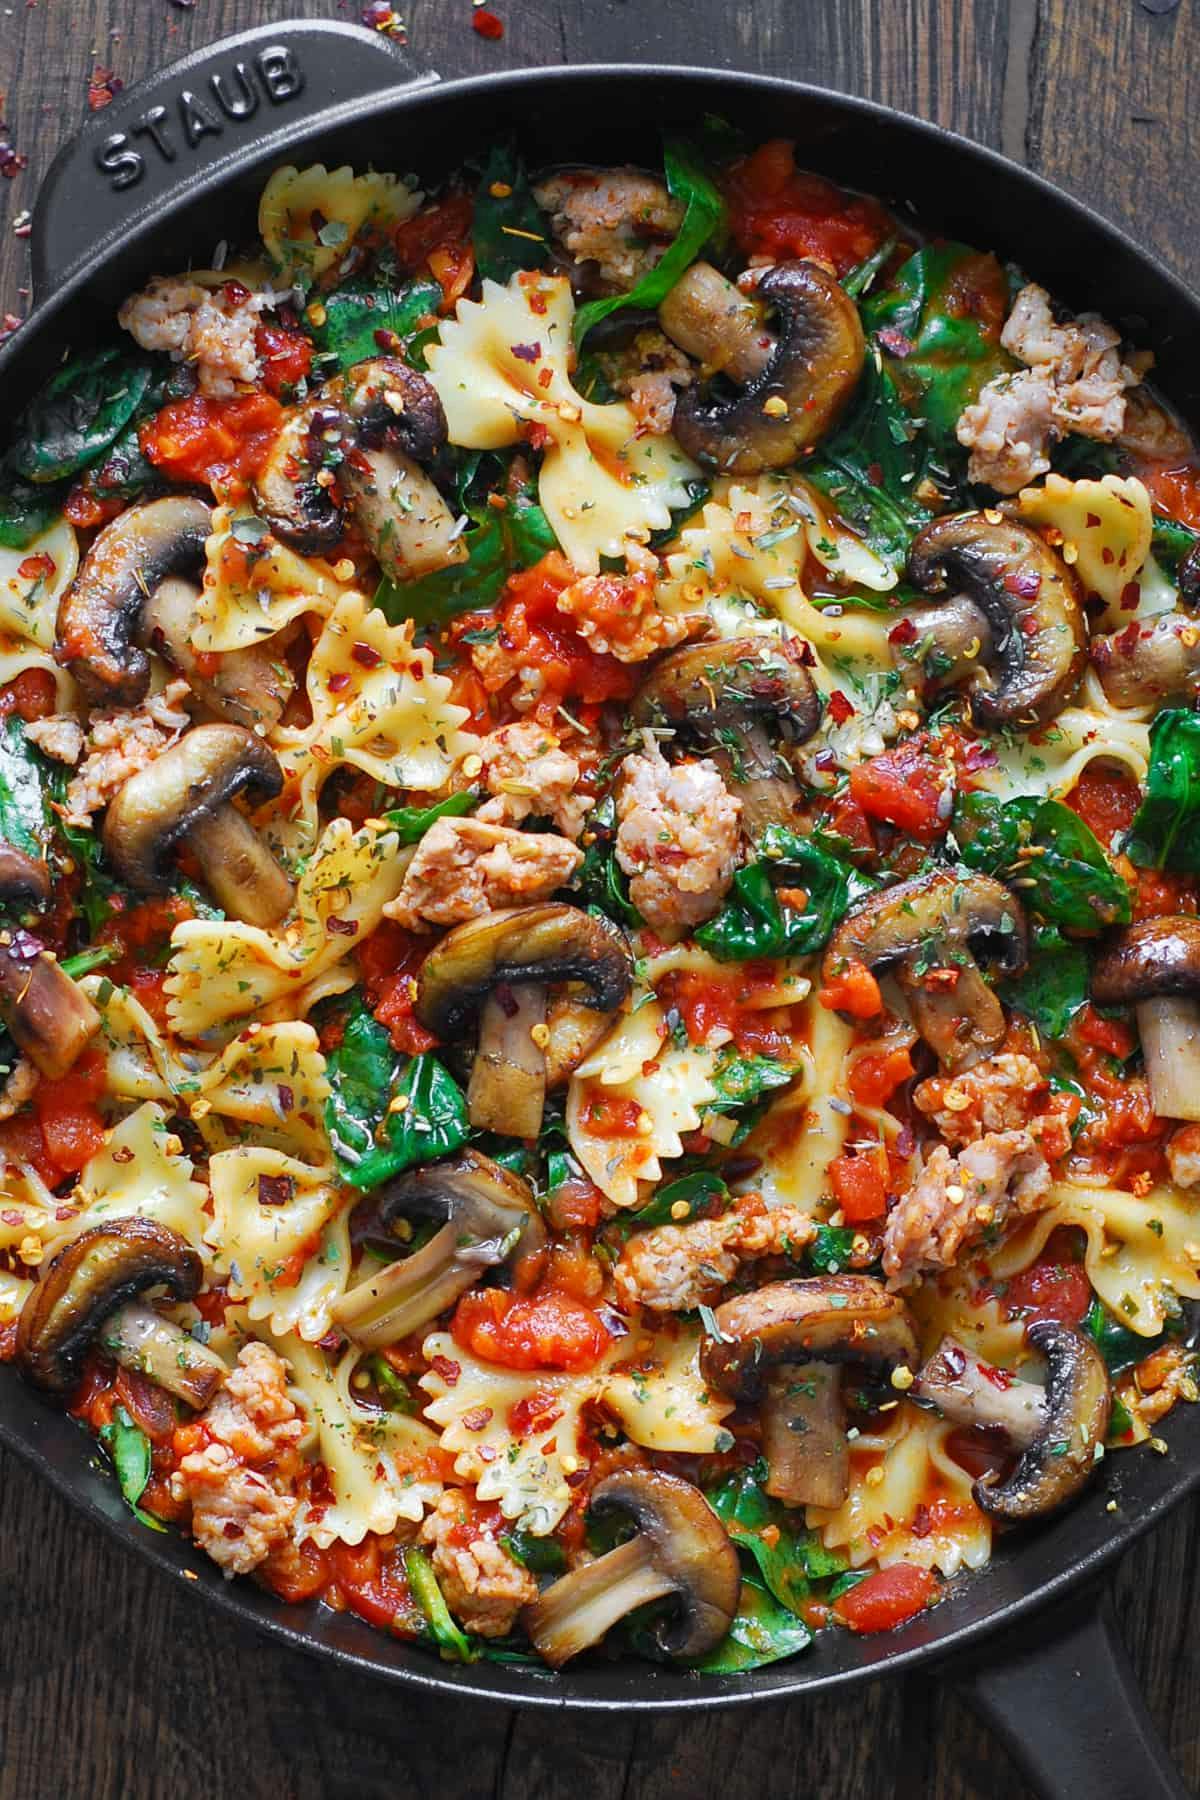 Italian Sausage Pasta with Spinach, Mushrooms, and Tomato Sauce